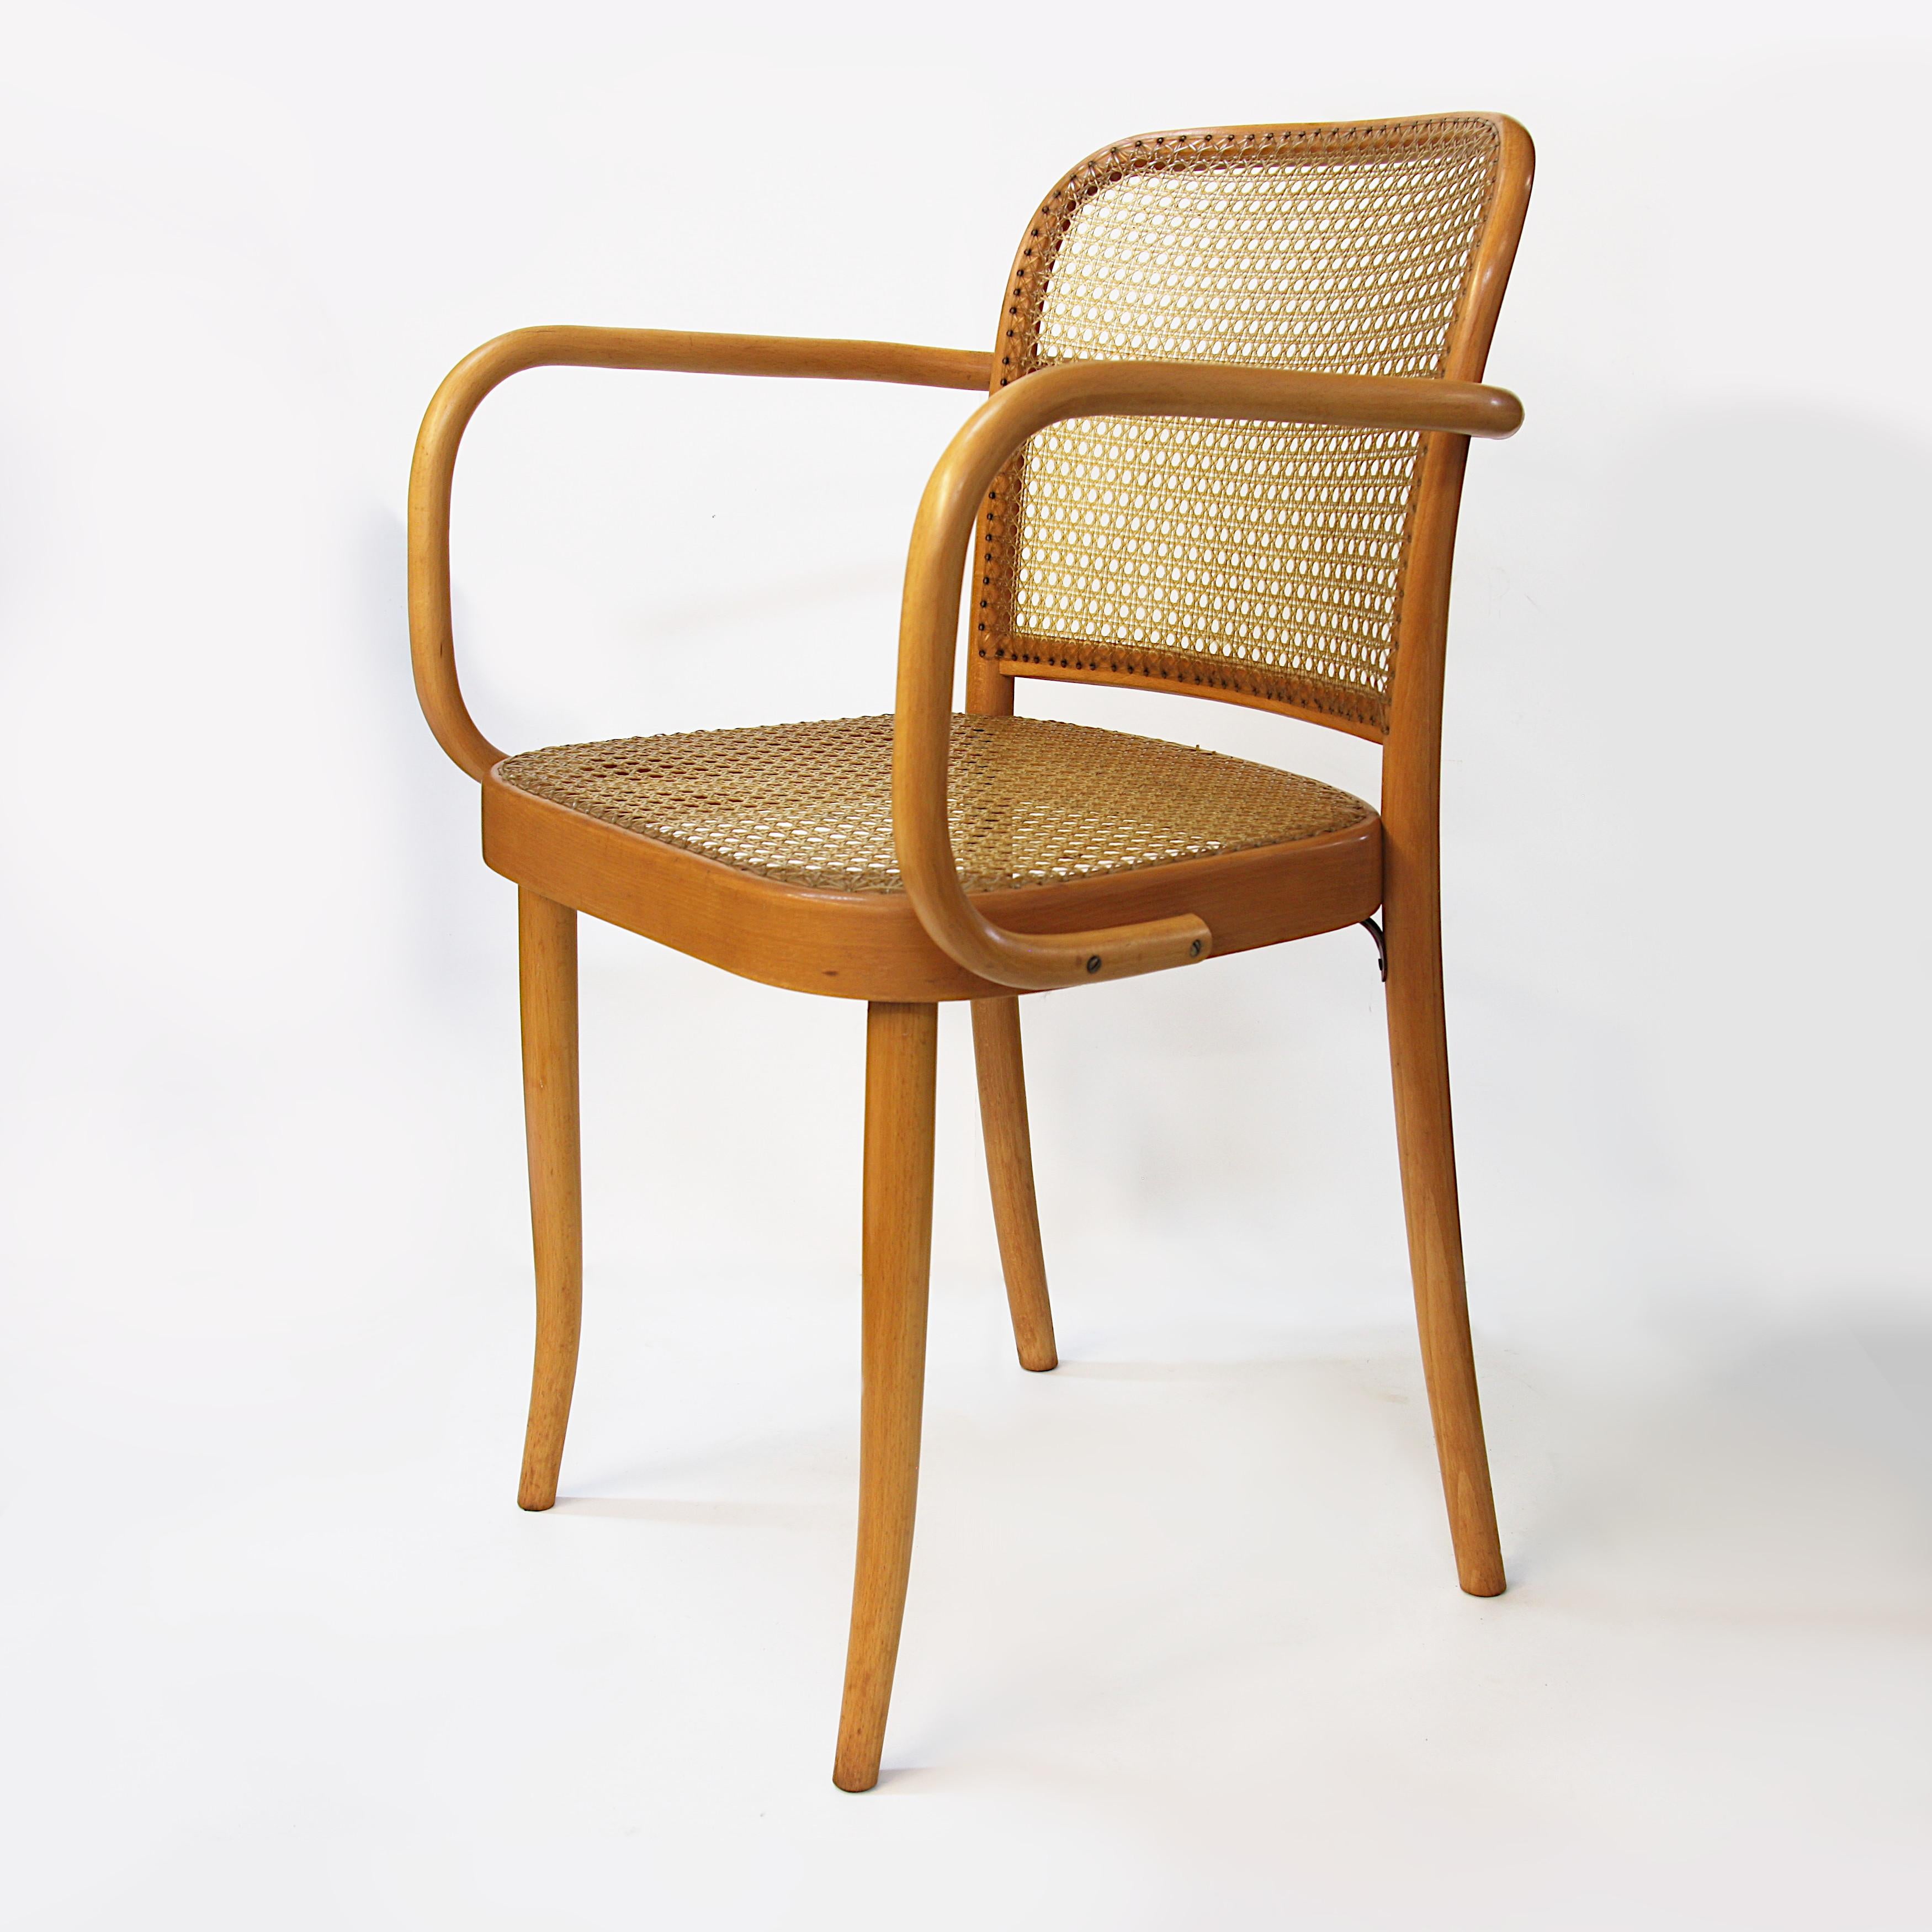 Wonderful set of six dining chairs designed by Josef Frank and Josef Hoffmann for Stendig. Chairs feature swooping, bentwood birch frames, handwoven cane seats/backs, and that iconic Bauhaus, 